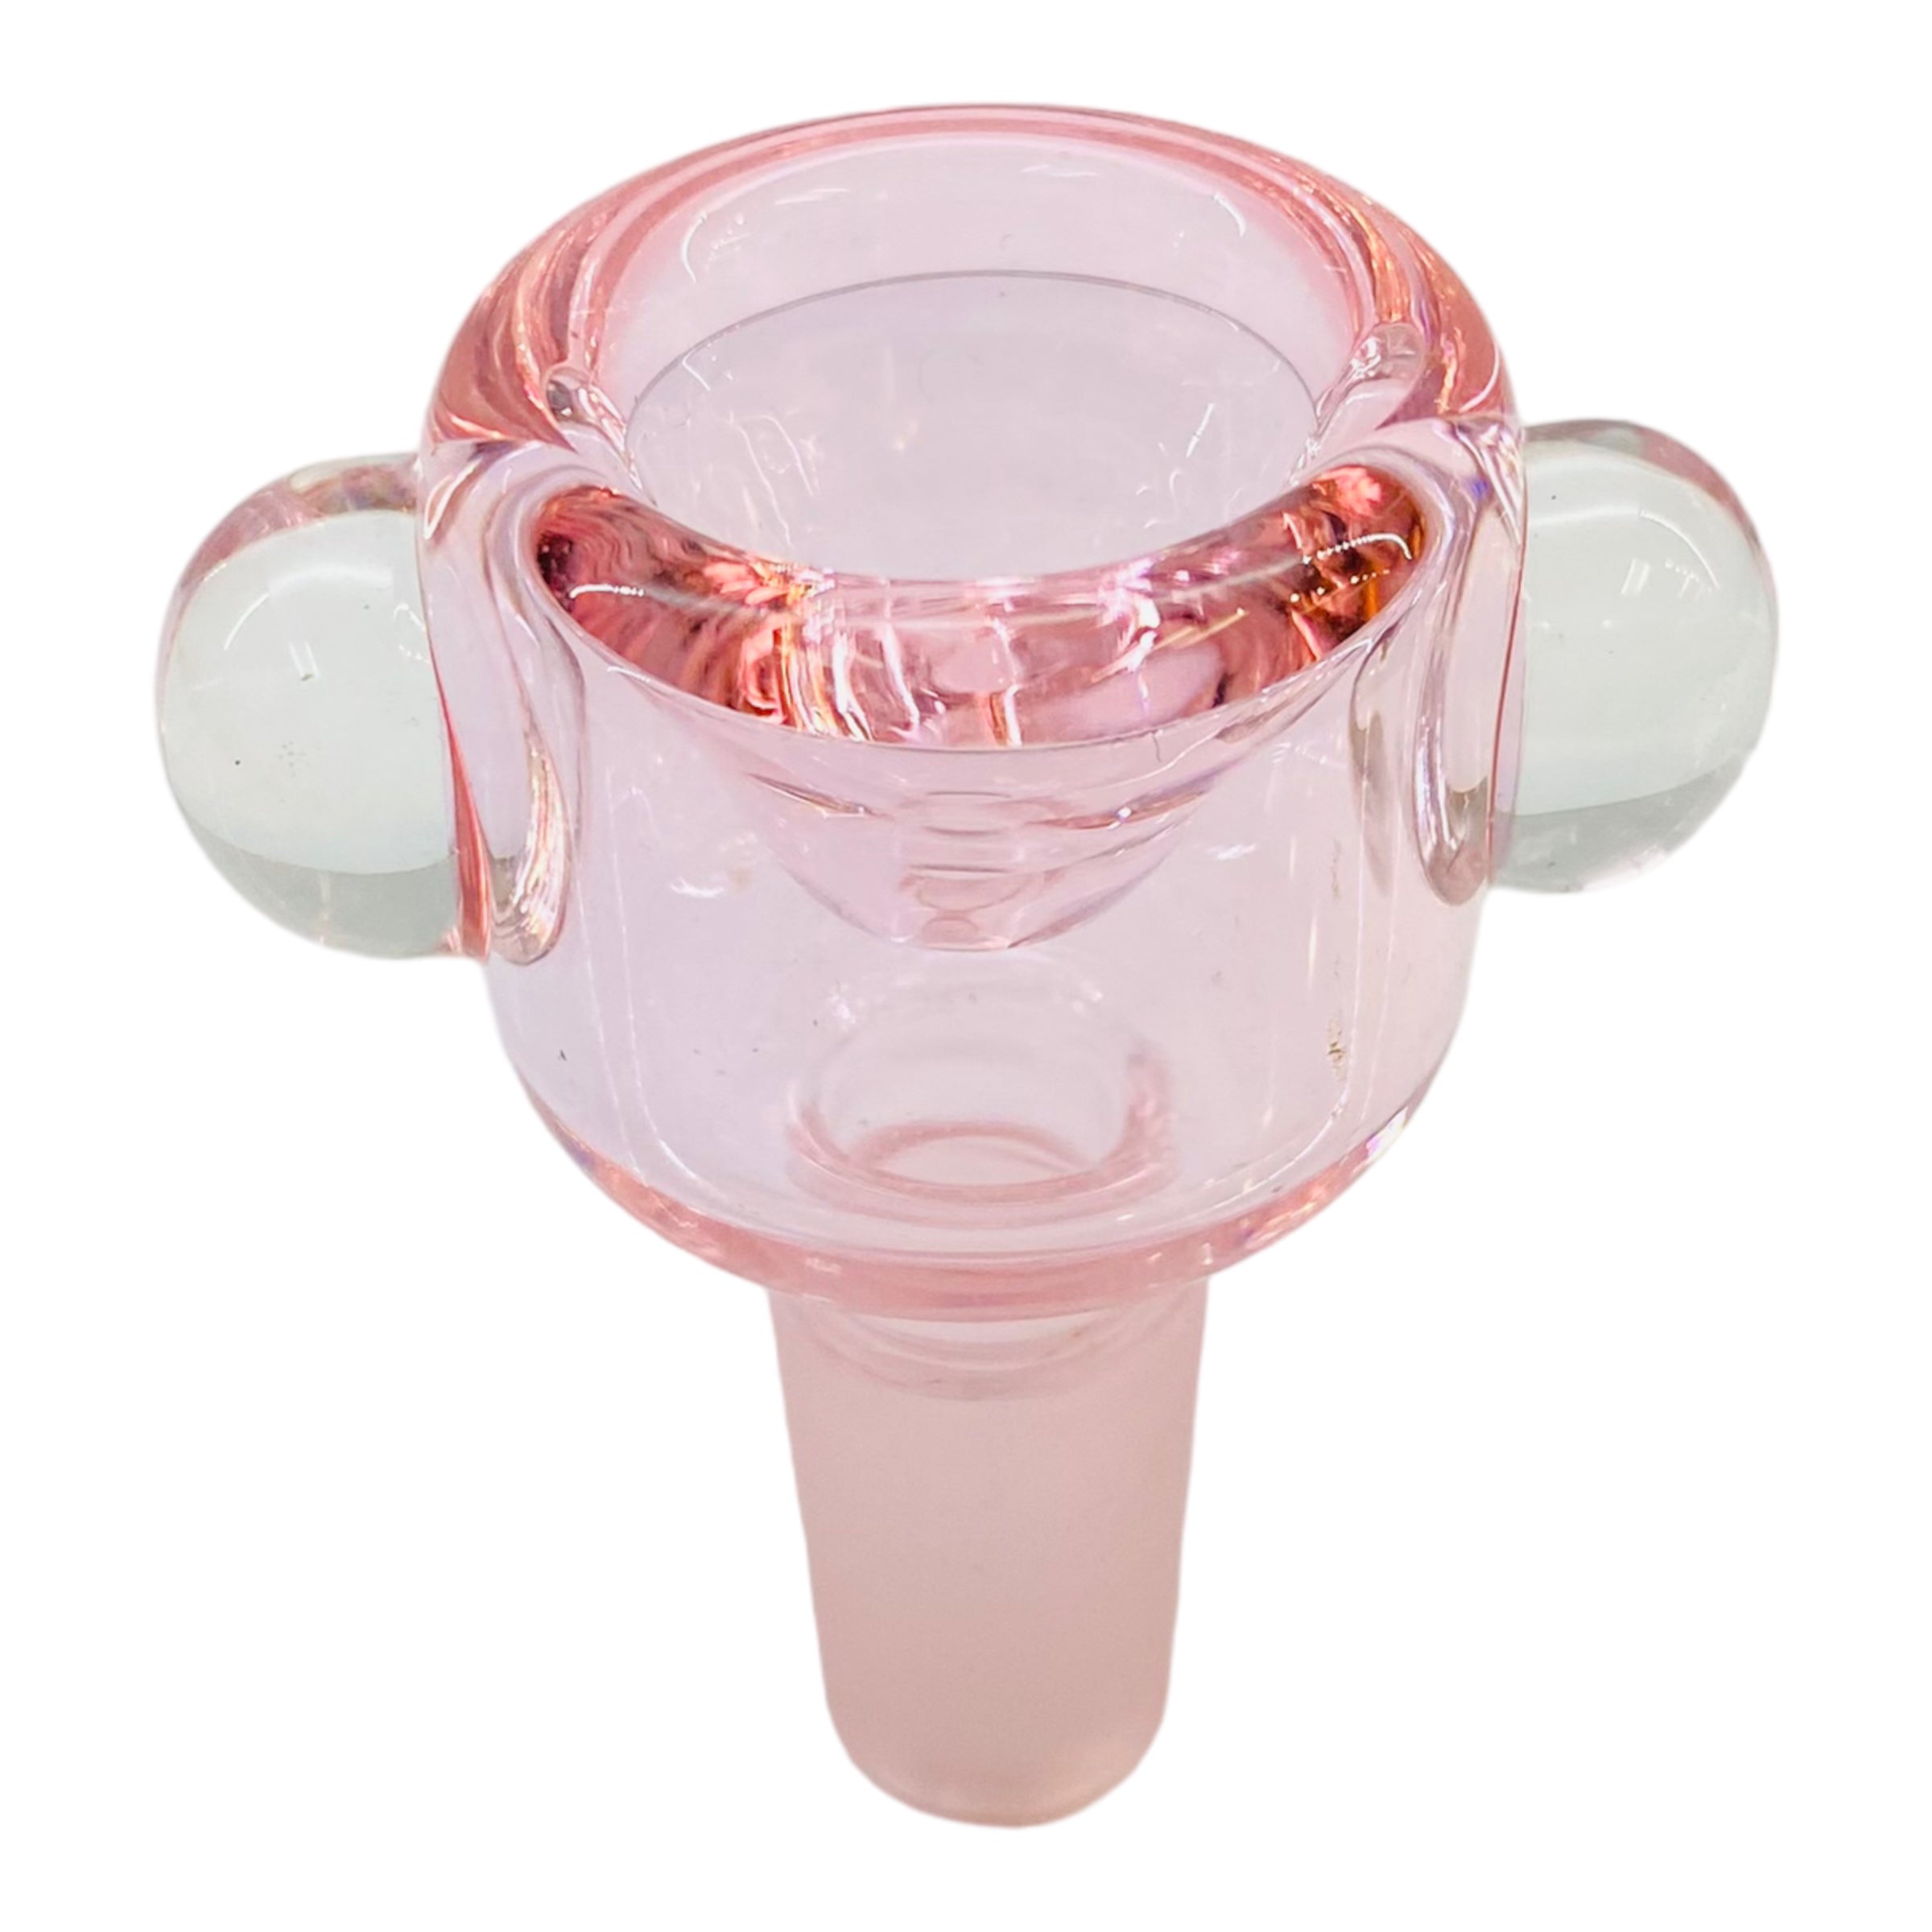 14mm Flower Bowl - Tall Straight Wall Bubble Bong Bowl Piece - Pink